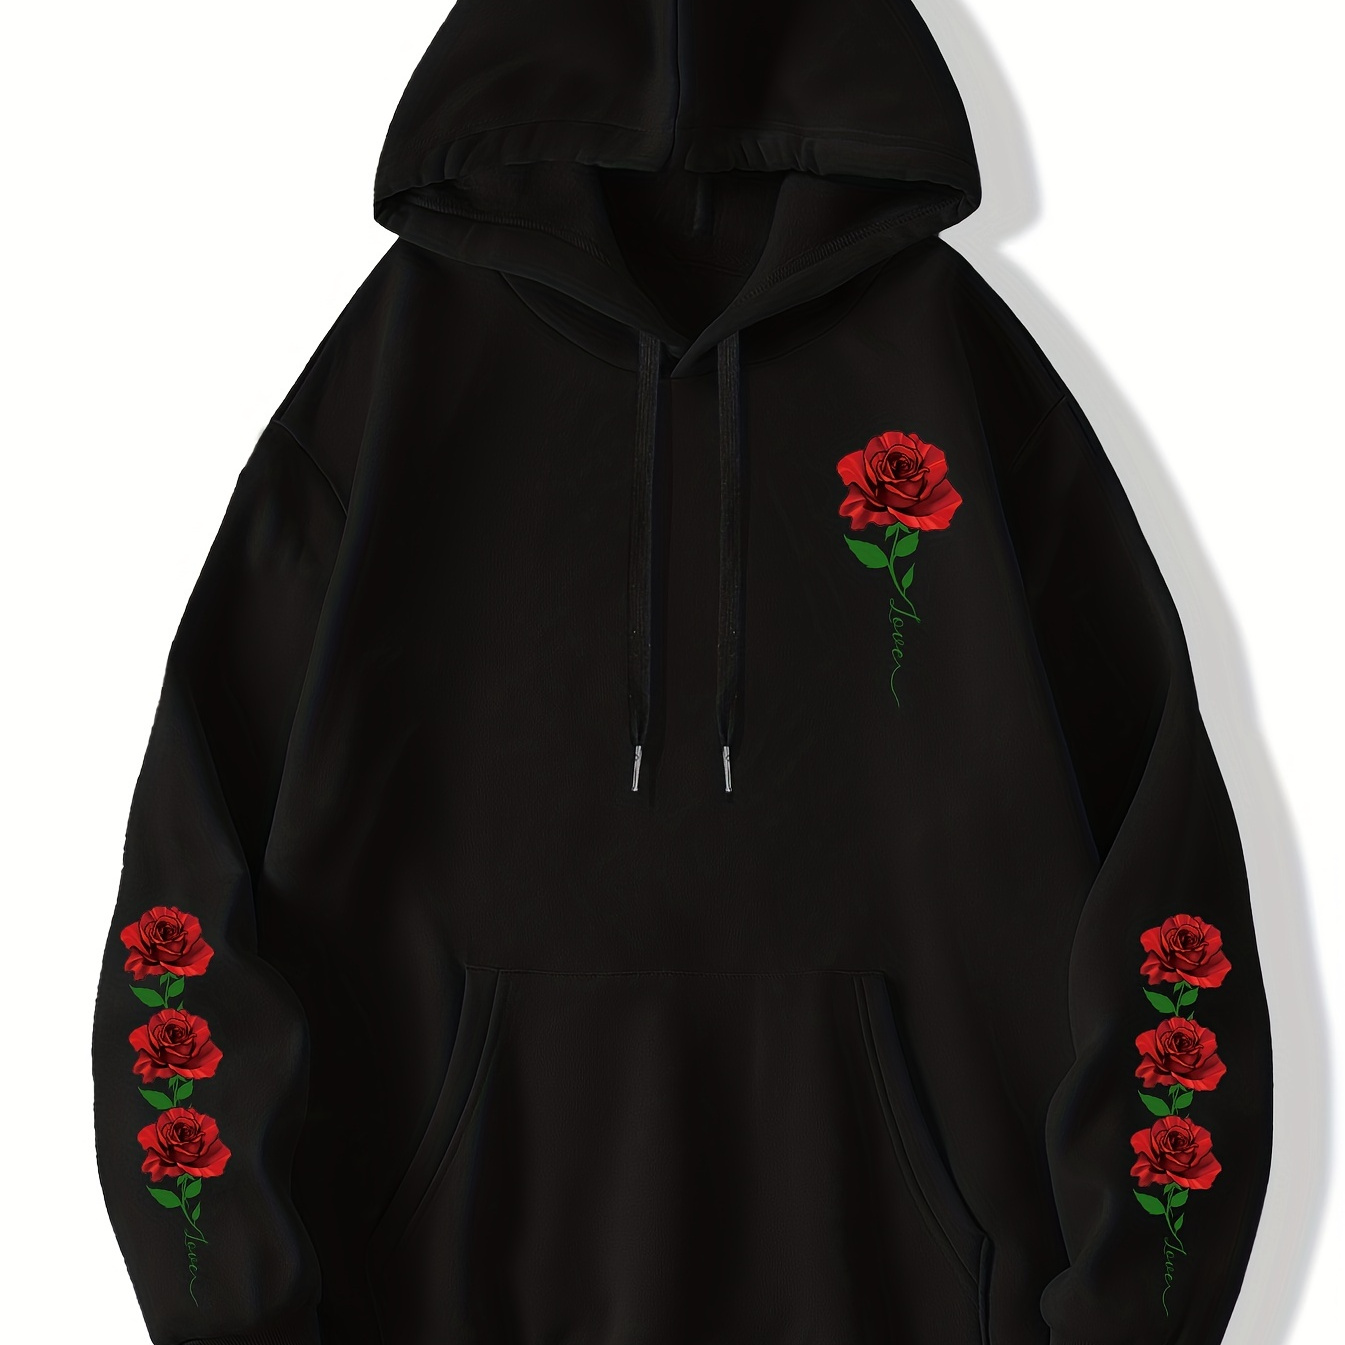 

Red Rose Print Men's Pullover Round Neck Hoodies With Kangaroo Pocket Long Sleeve Hooded Sweatshirt Loose Casual Top For Autumn Winter Men's Clothing As Gifts